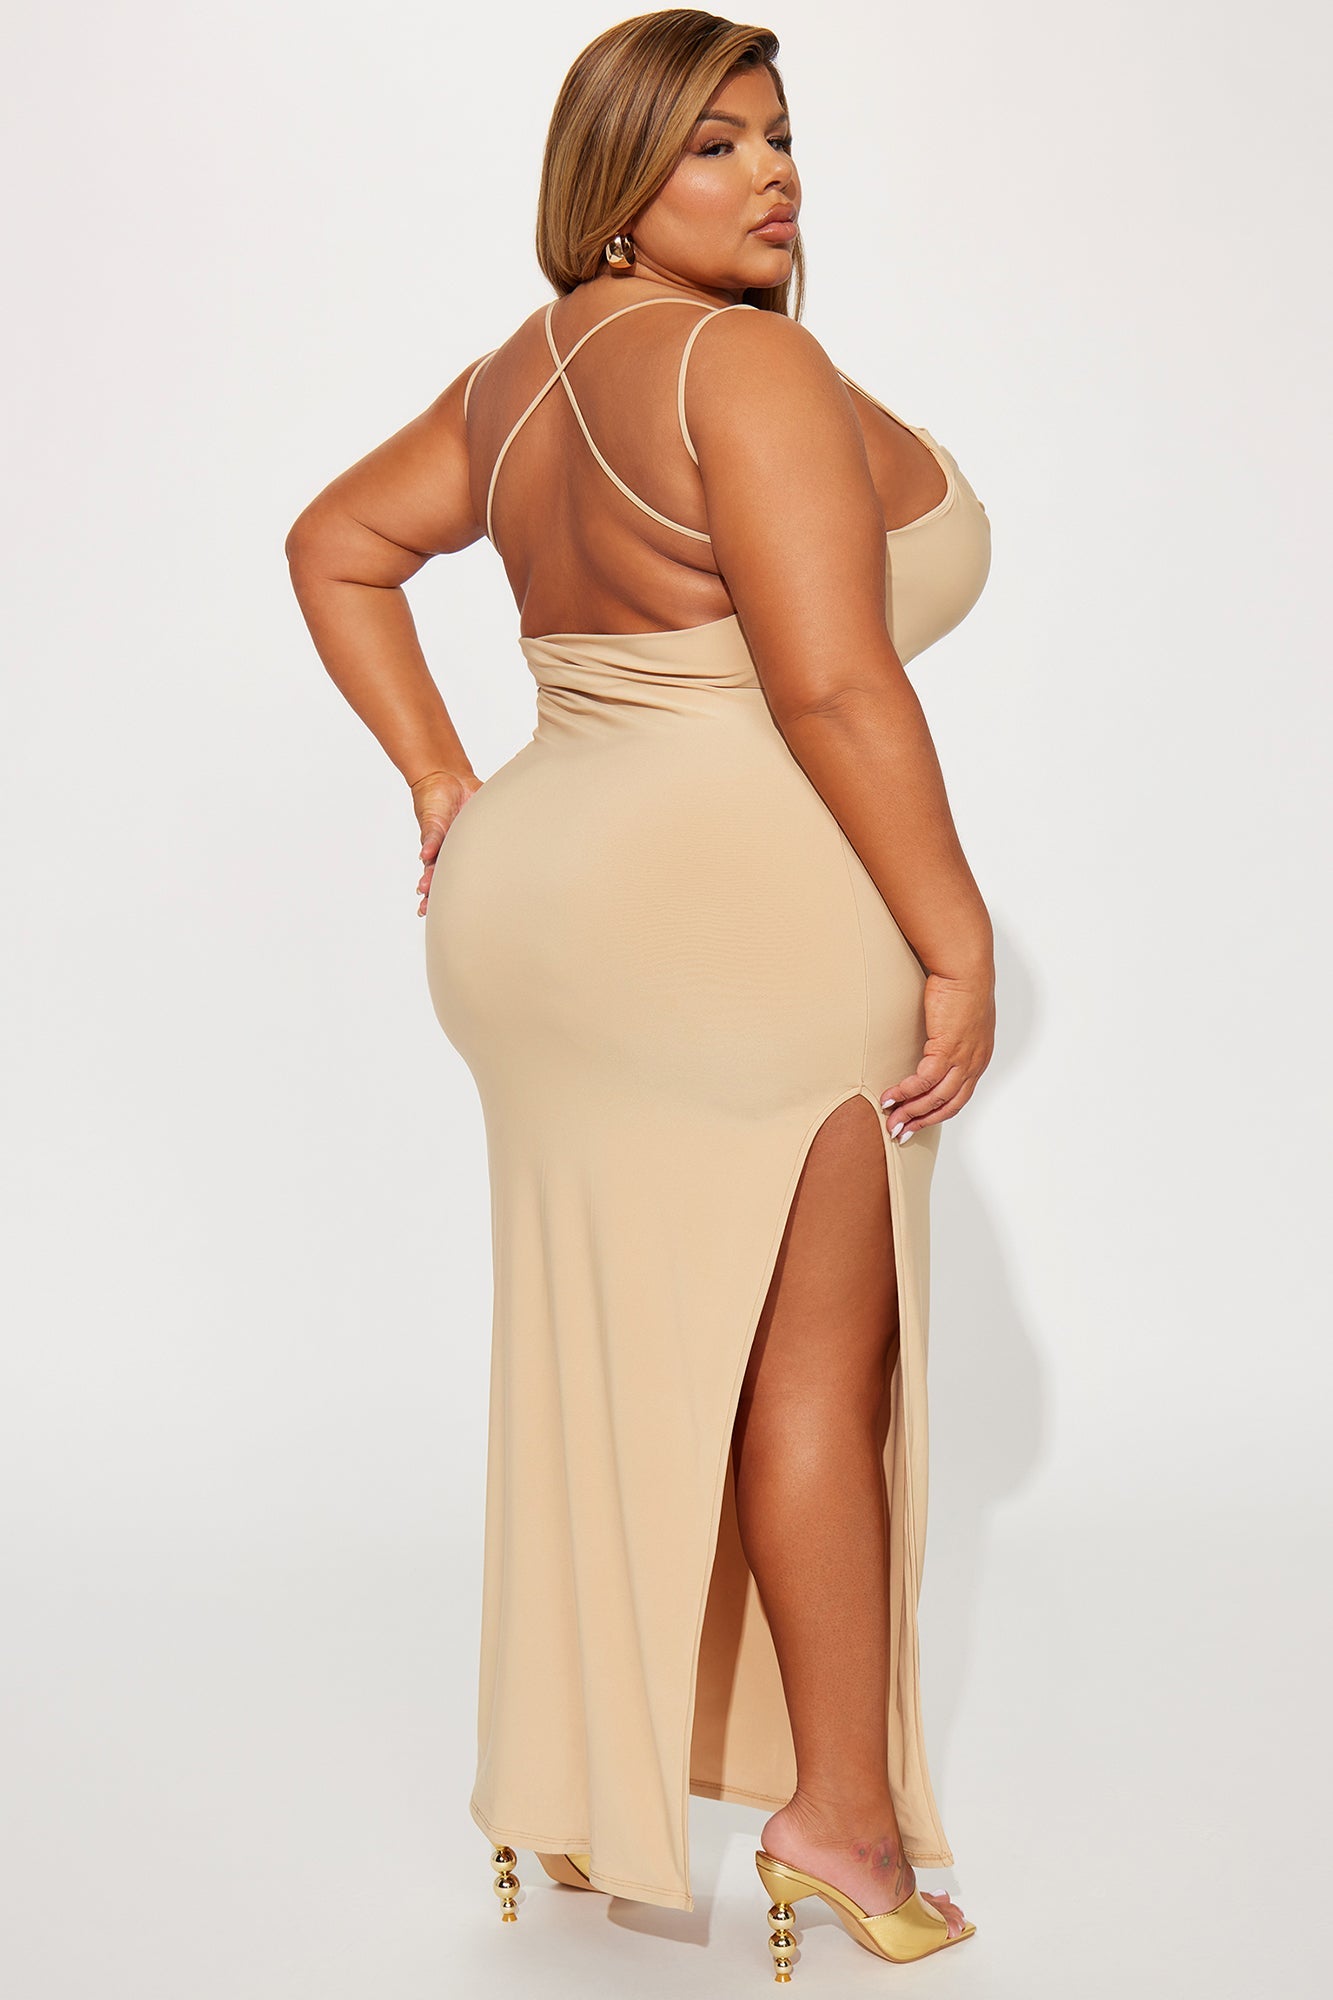 Janelle Backless Maxi Dress - Nude